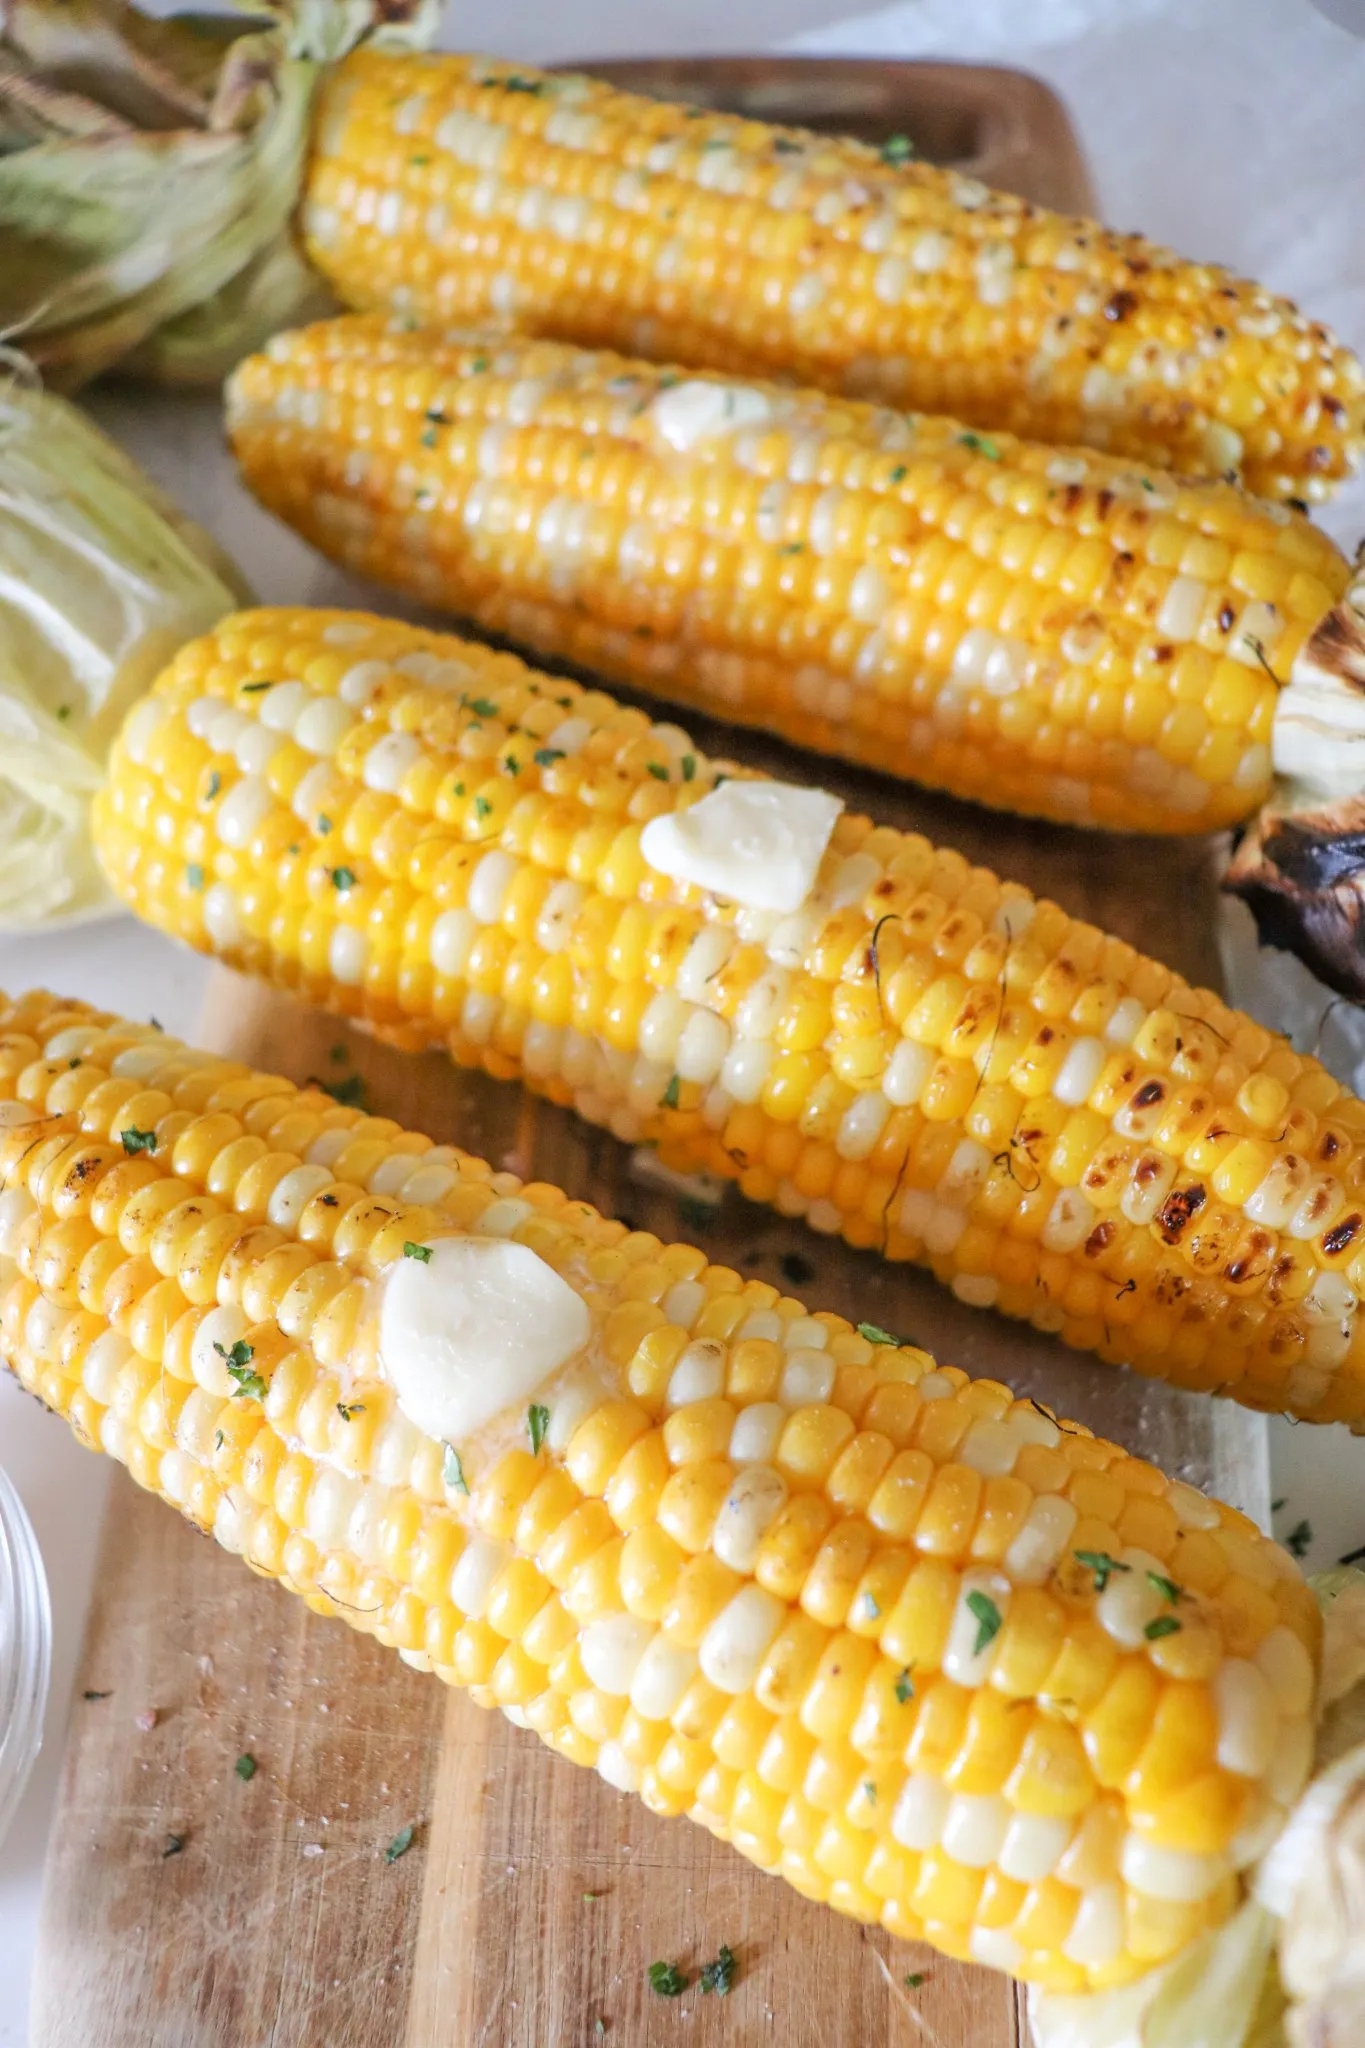 Four ears of corn on the cob flavored with butter.